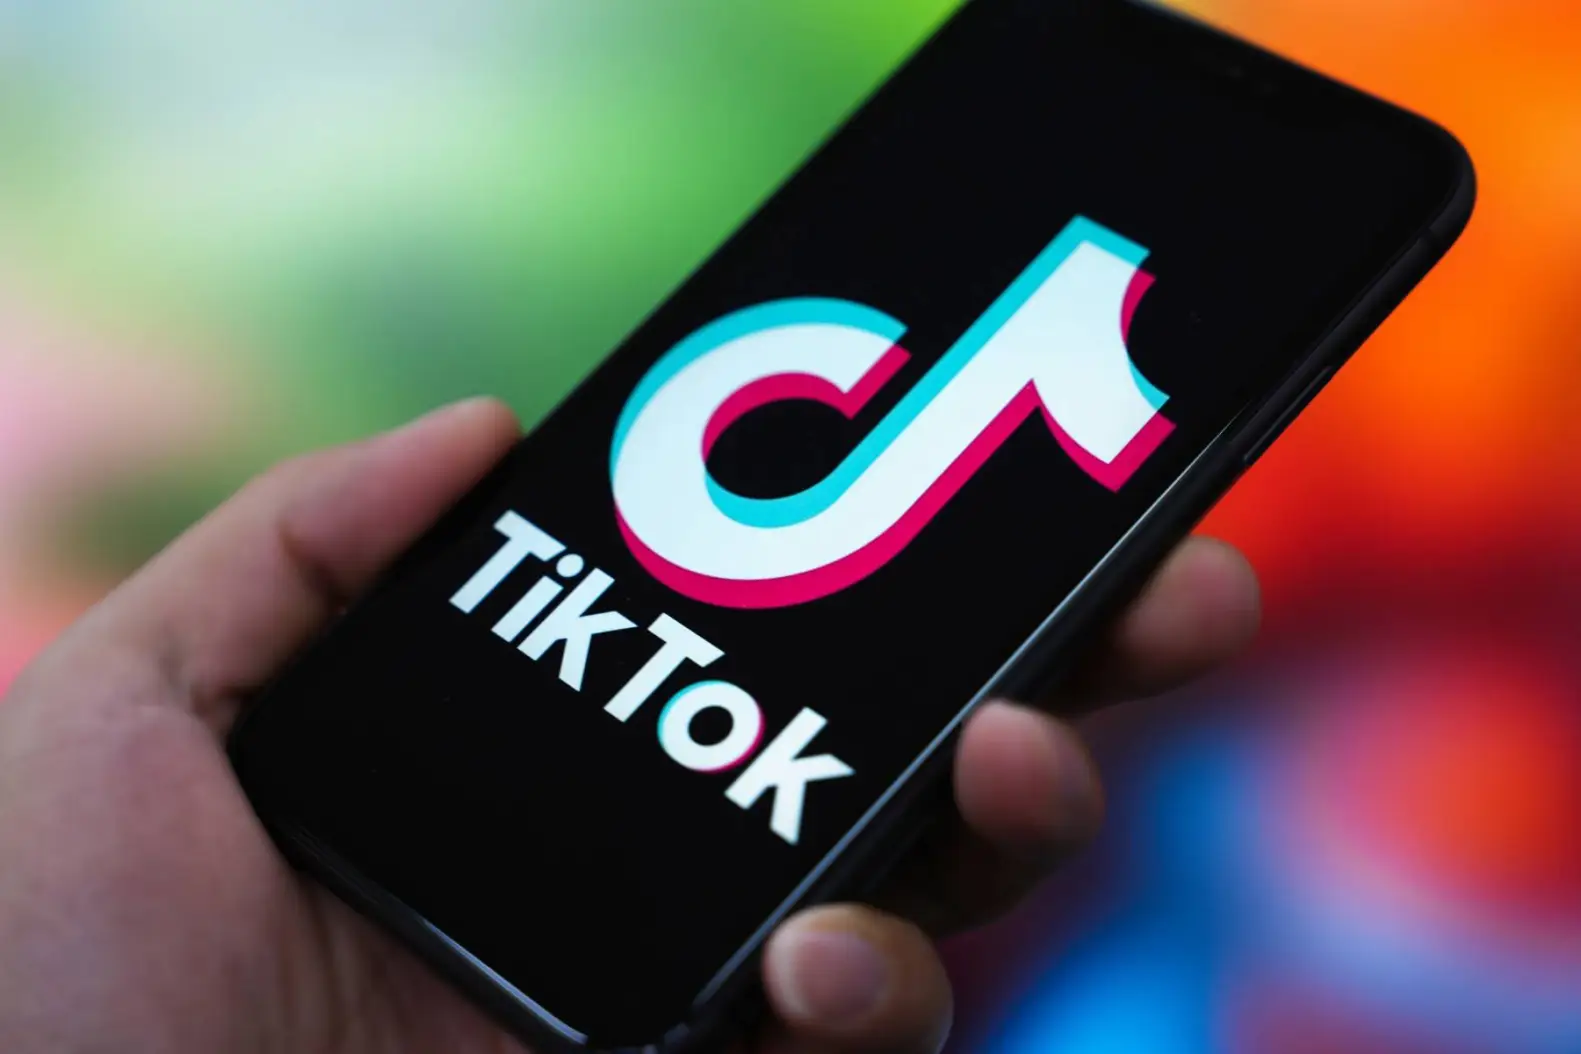 After Already Losing UMG’s Roster, TikTok May Be Losing Rights To Even More Music